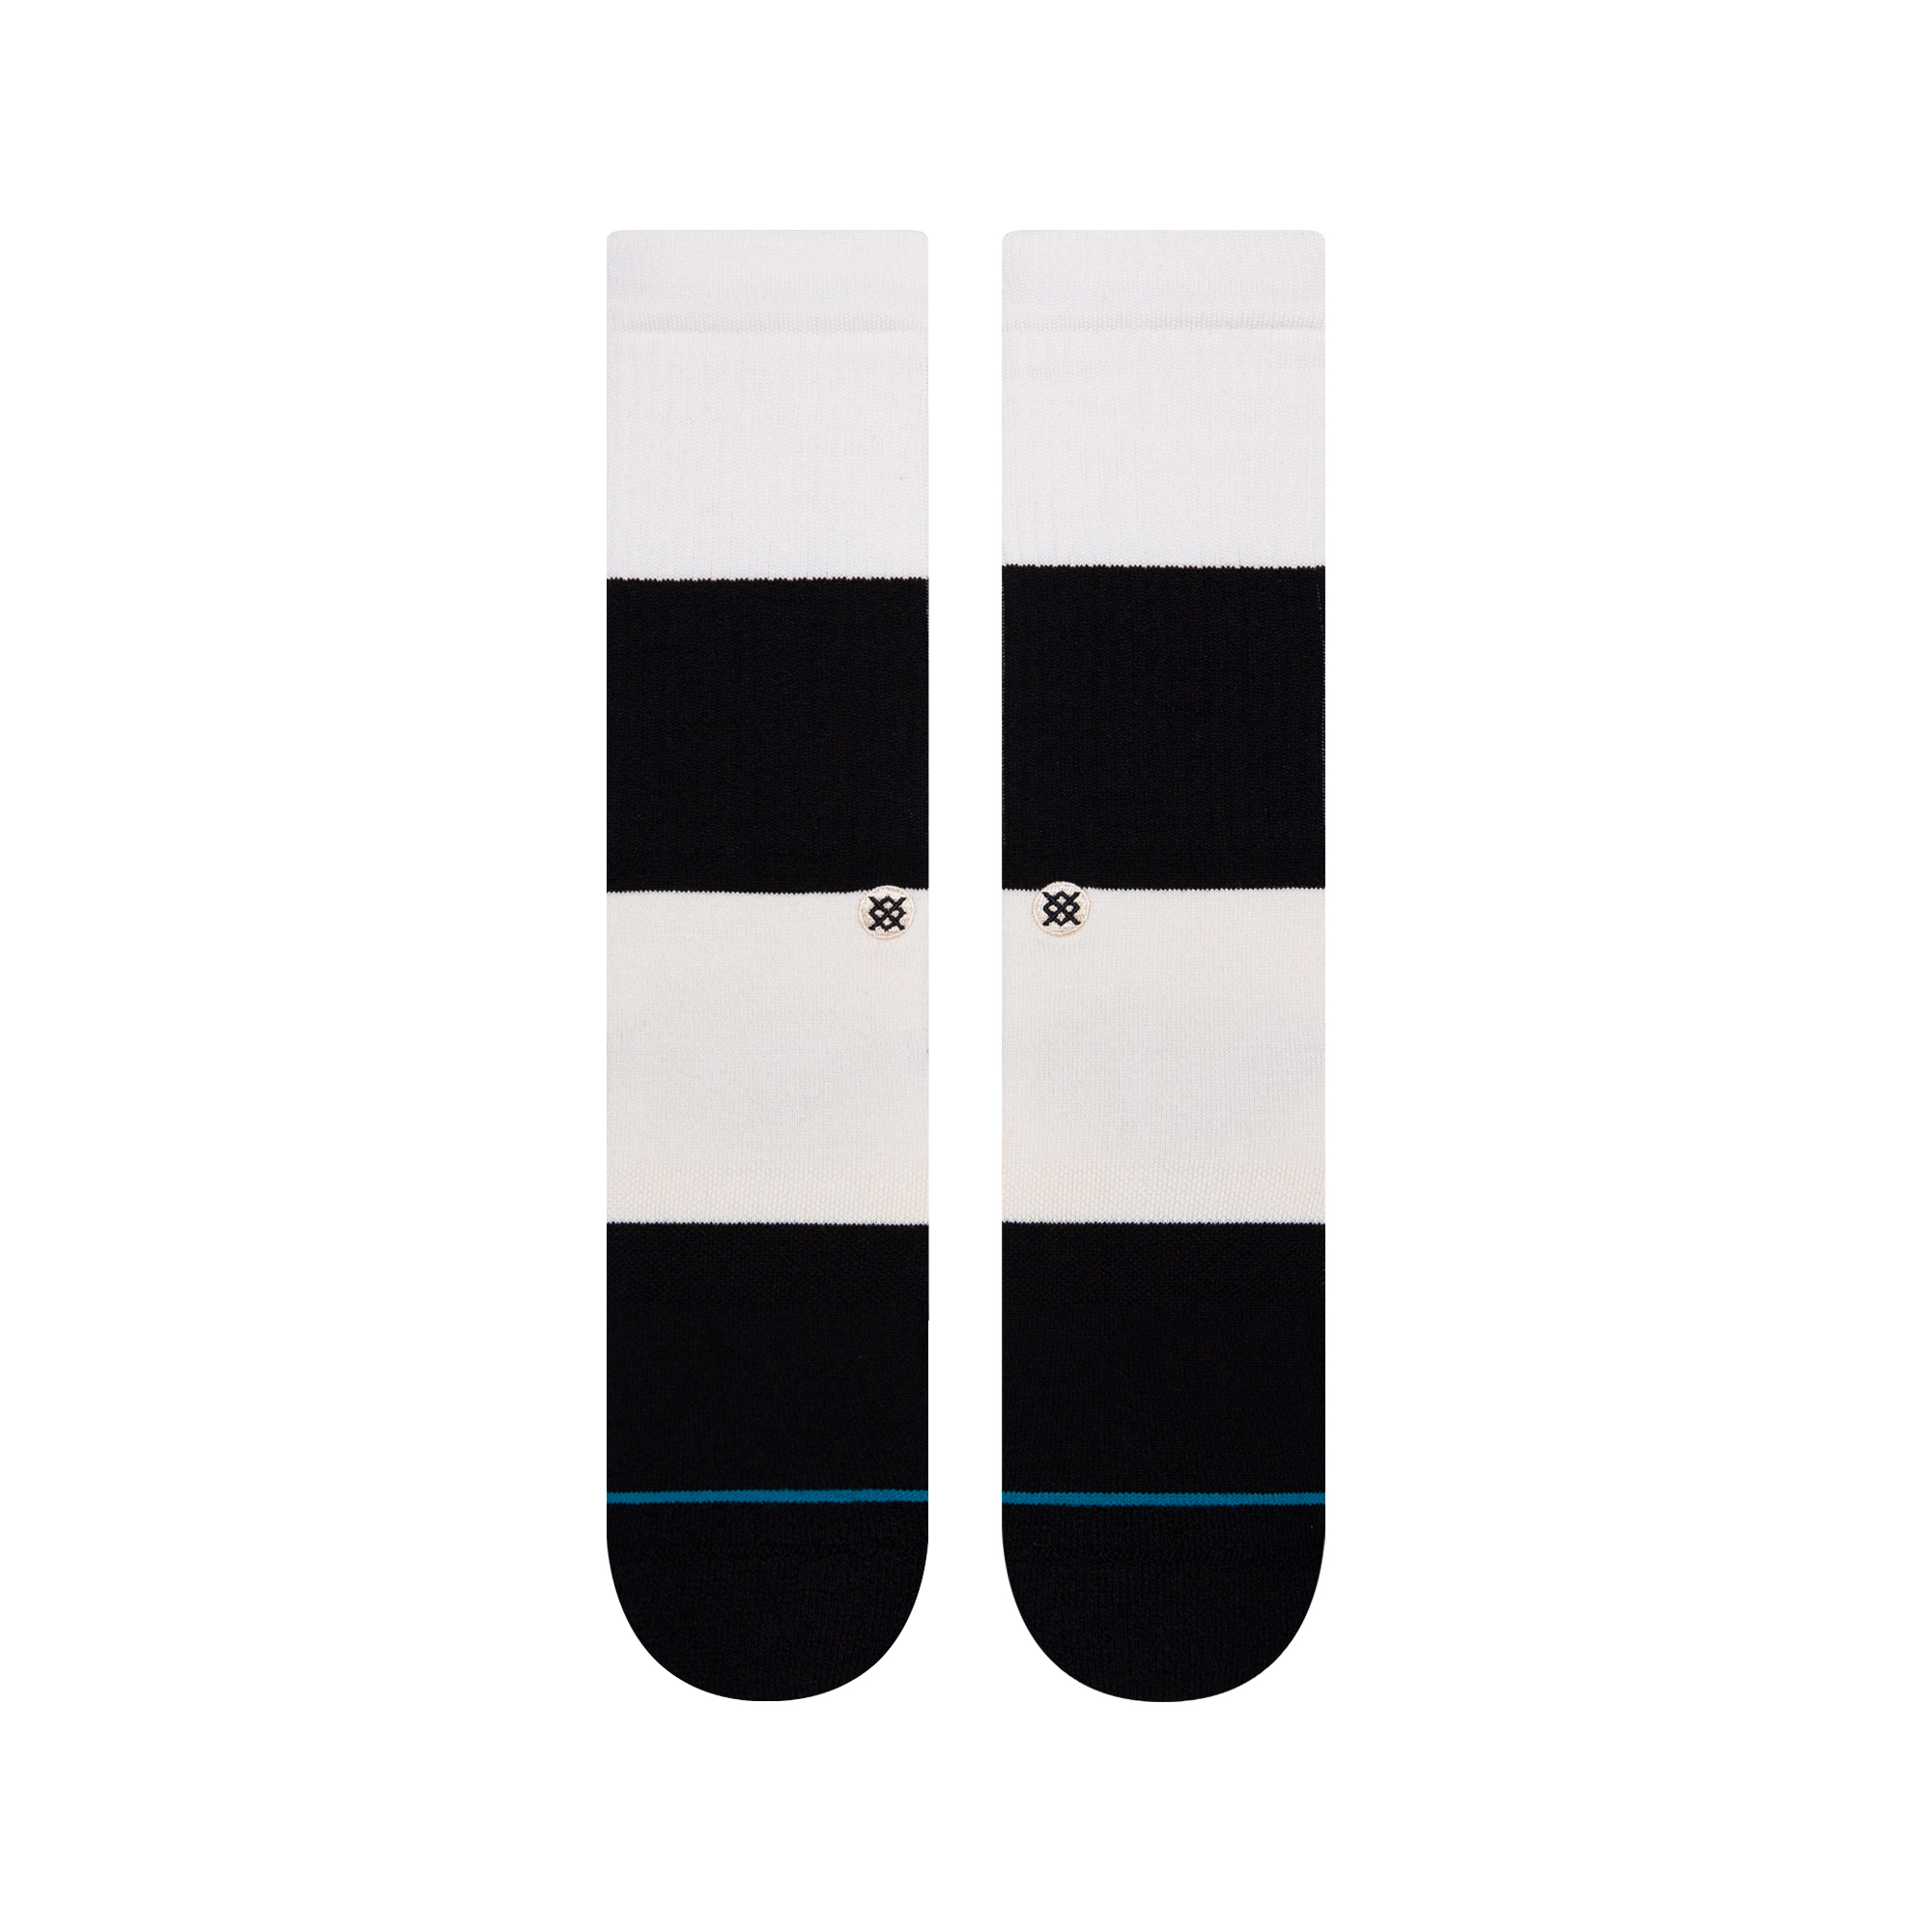 Spectrum 2 Mid Cushion Butter Blend™ with Infiknit™ Crew Socks | Stance